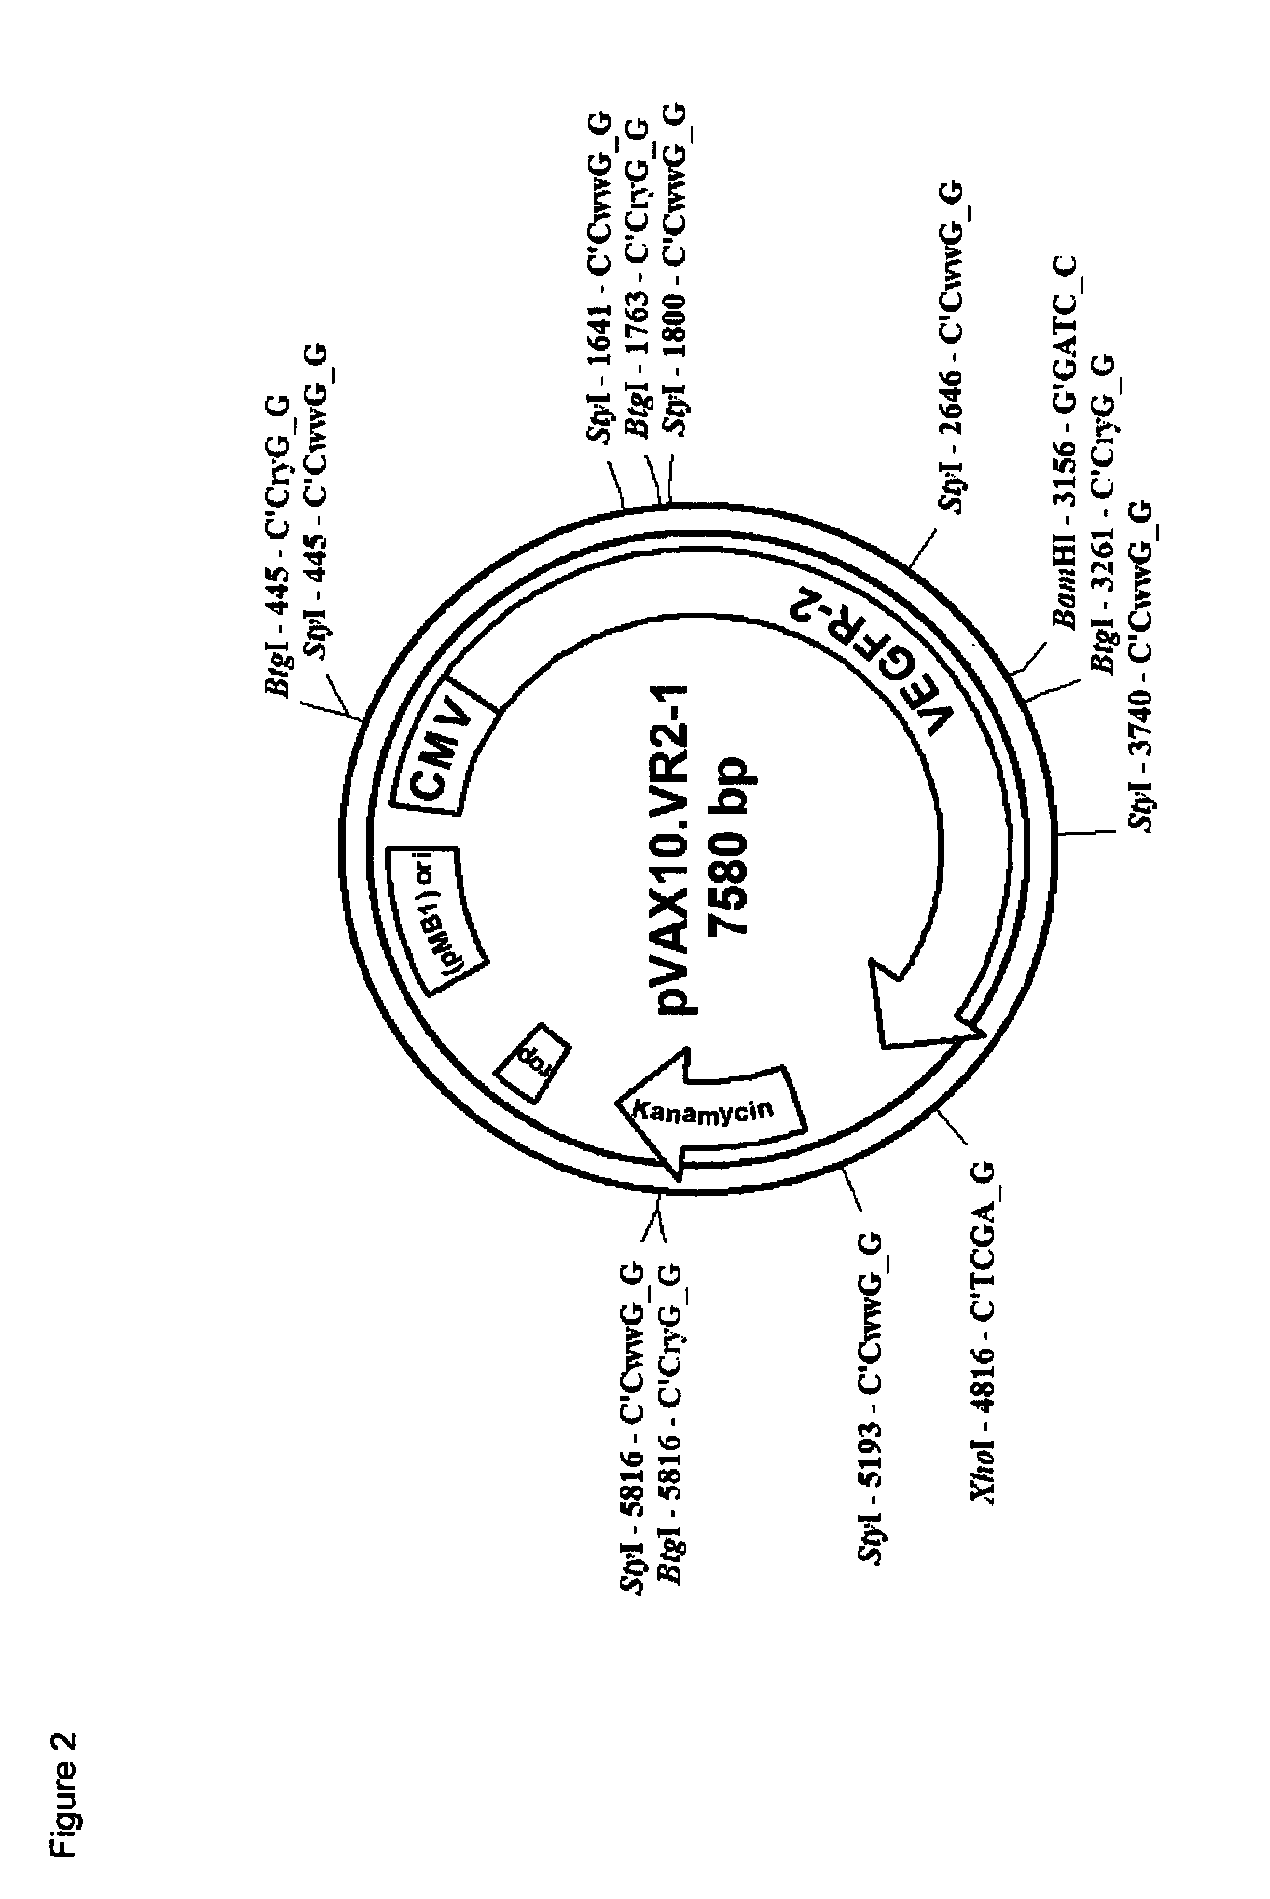 Method for producing high yield attenuated <i>Salmonella </i>strains